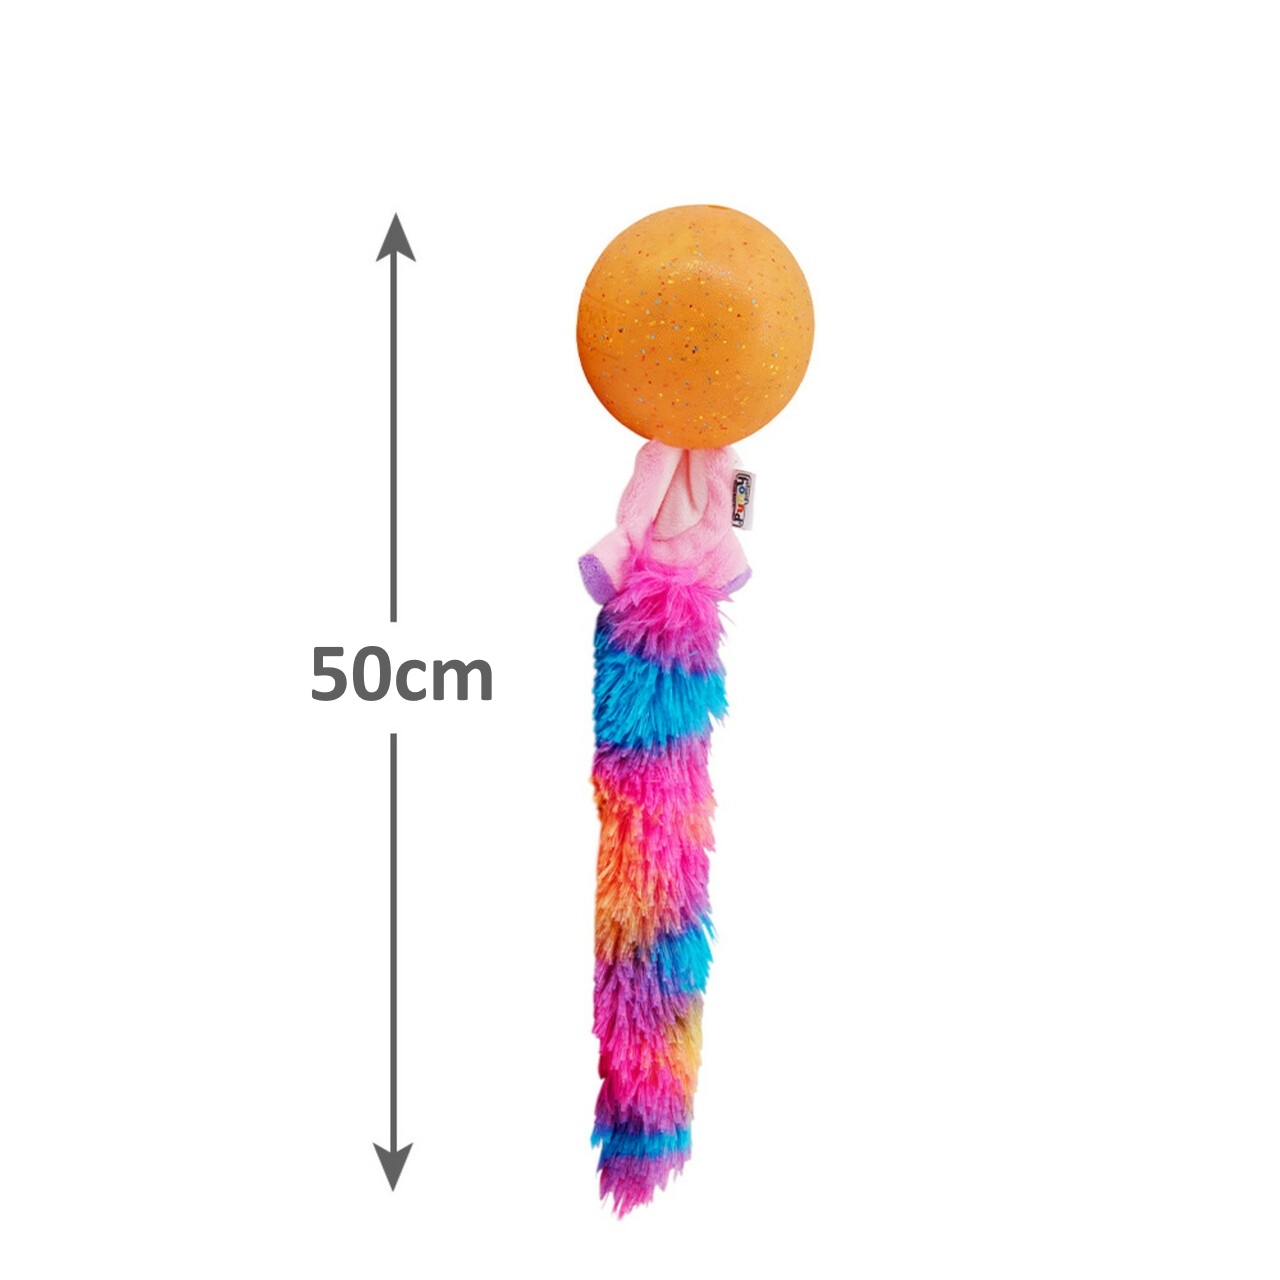 Outward Hound 2-in-1 Surprize Tailz Ball & Plush Toy - Assorted Designs image 4